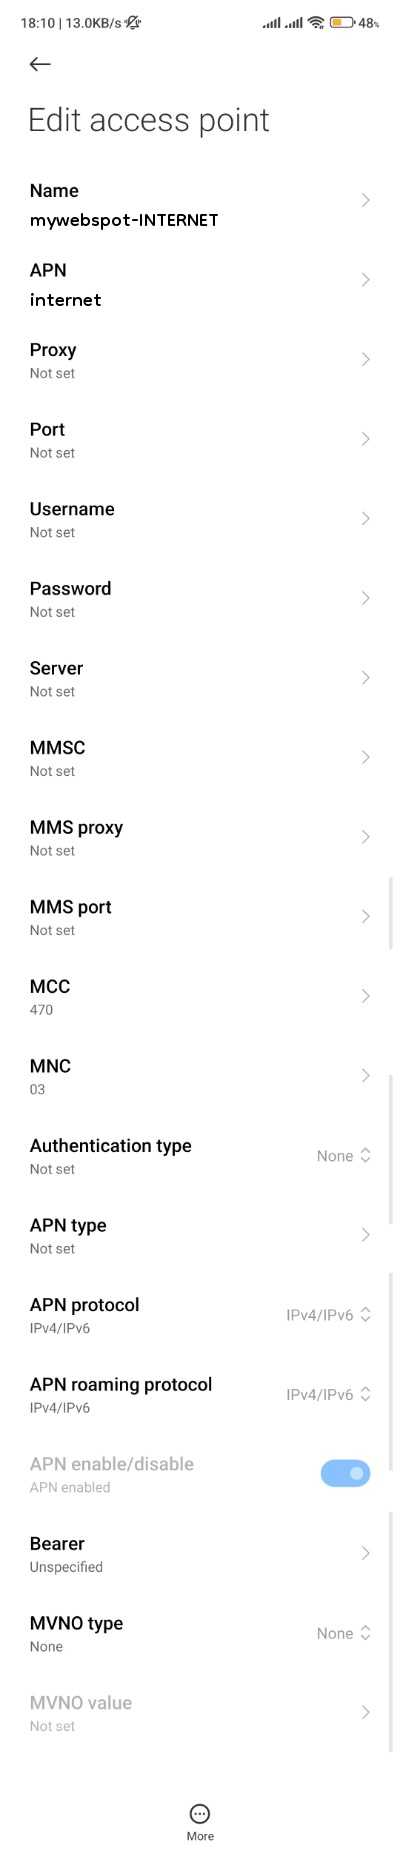 mywebspot APN Setiings for Android iPhone 3G 4G Internet